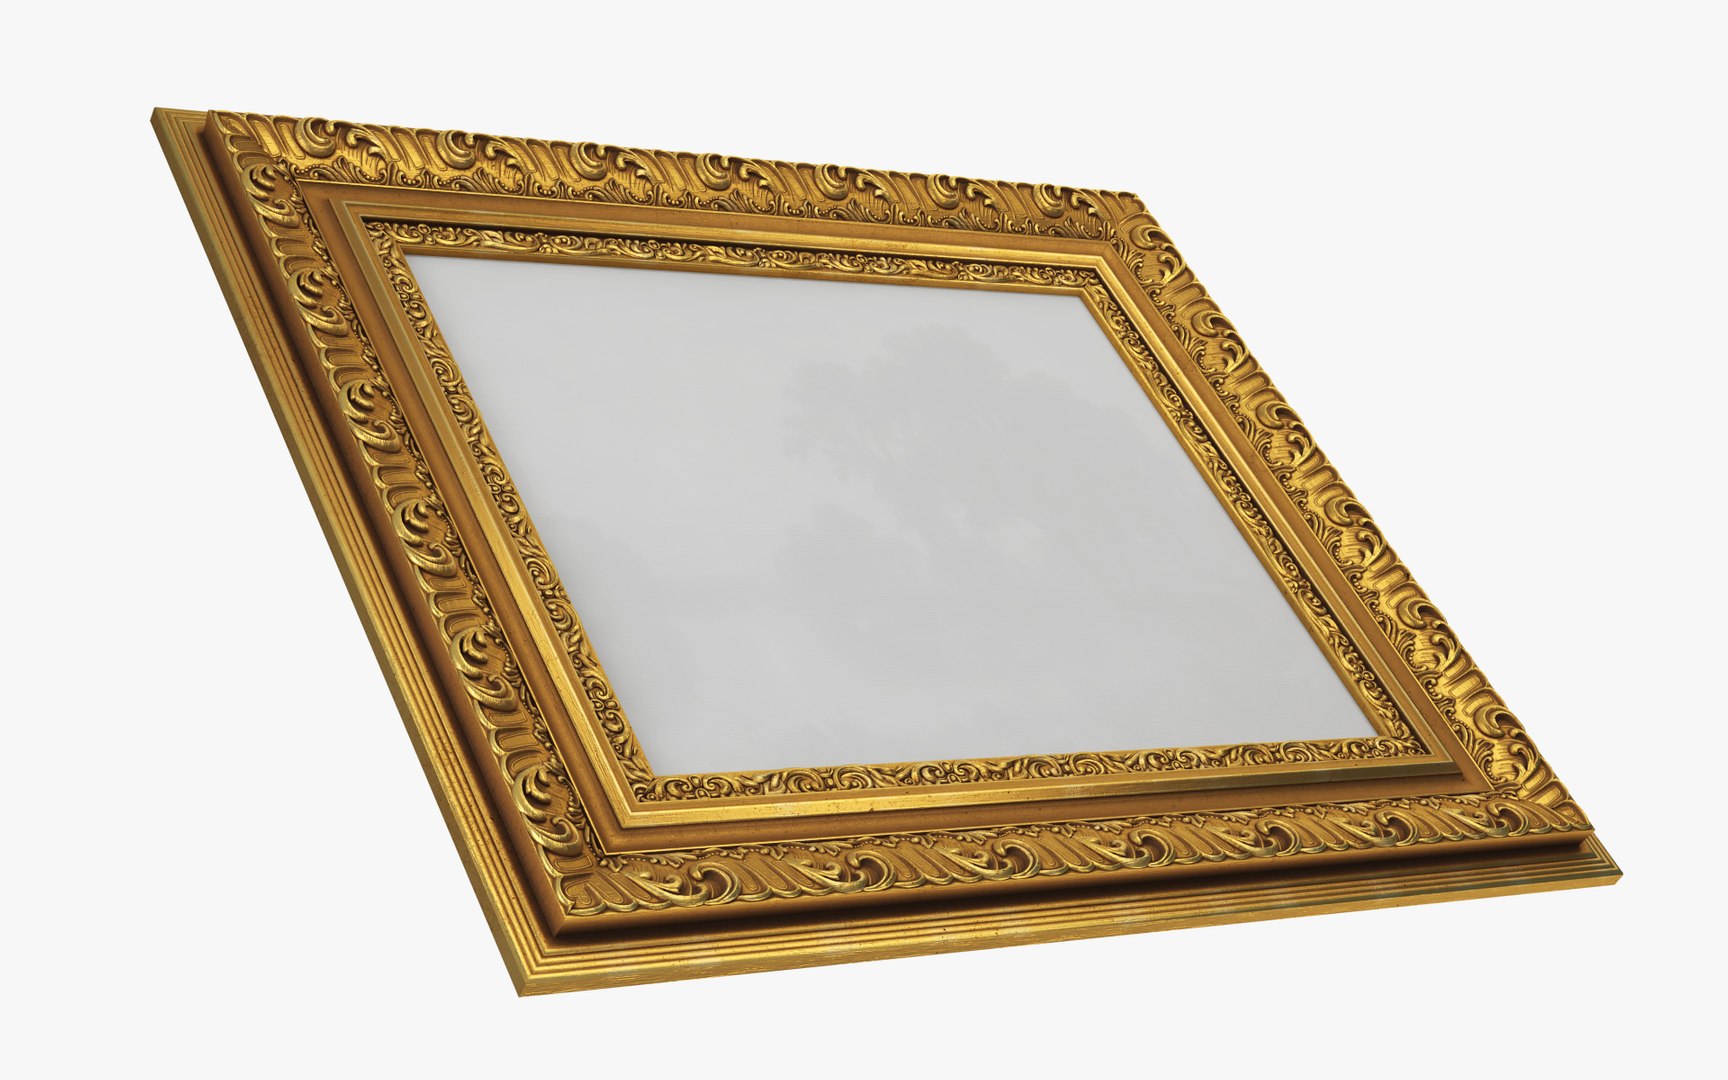 15,185 Small Picture Frame Images, Stock Photos, 3D objects, & Vectors